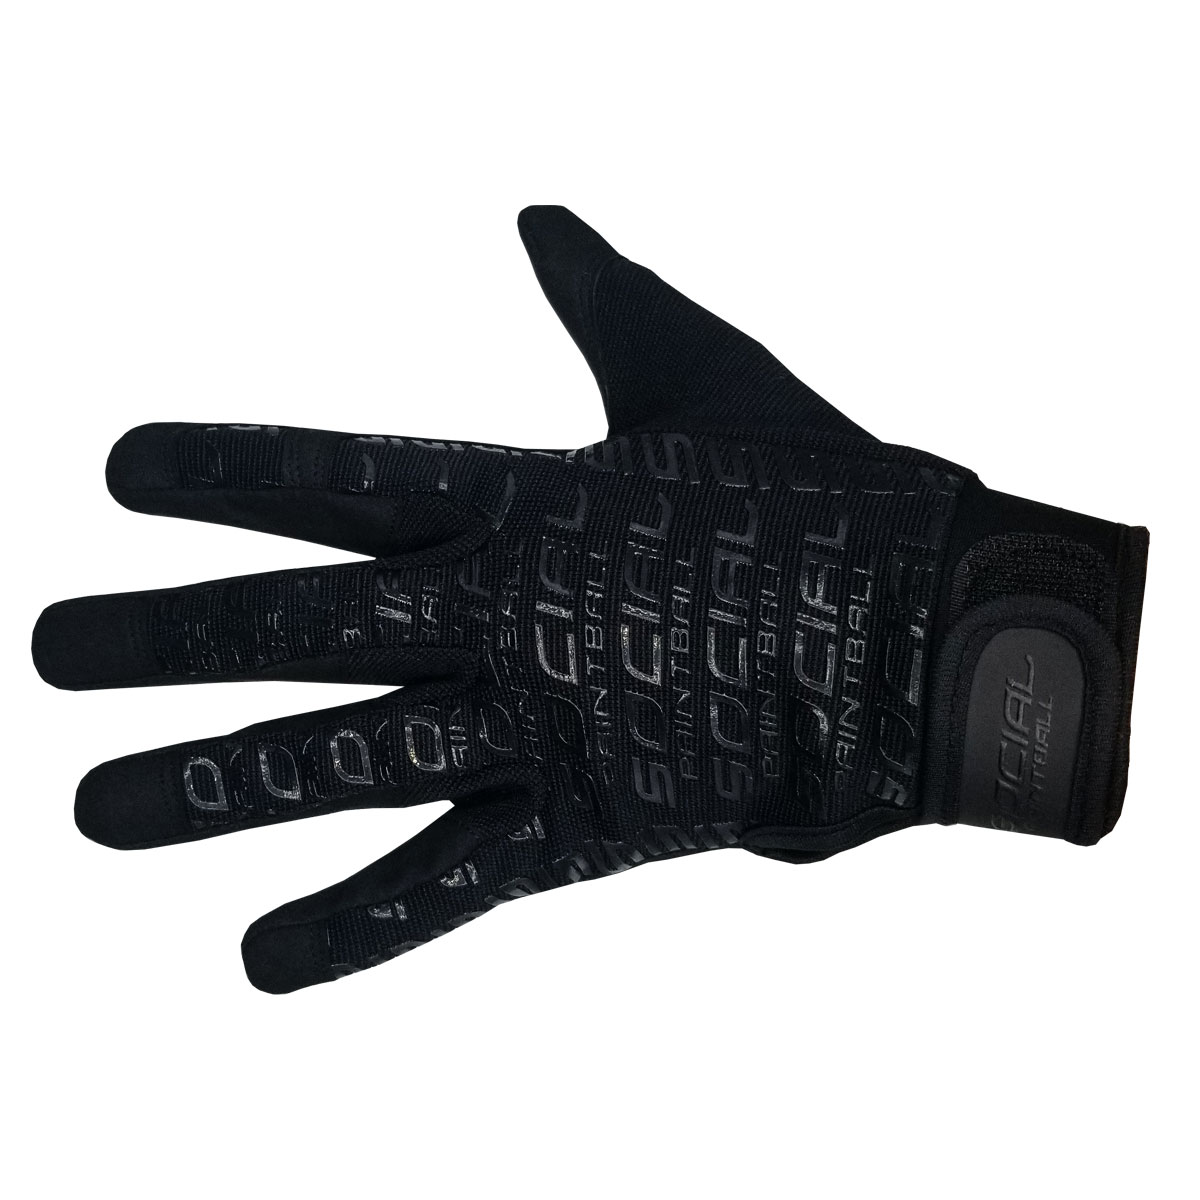 Details about   Social Paintball SMPL Armor Gloves Protective Gear Half Finger Black 2XL NEW 